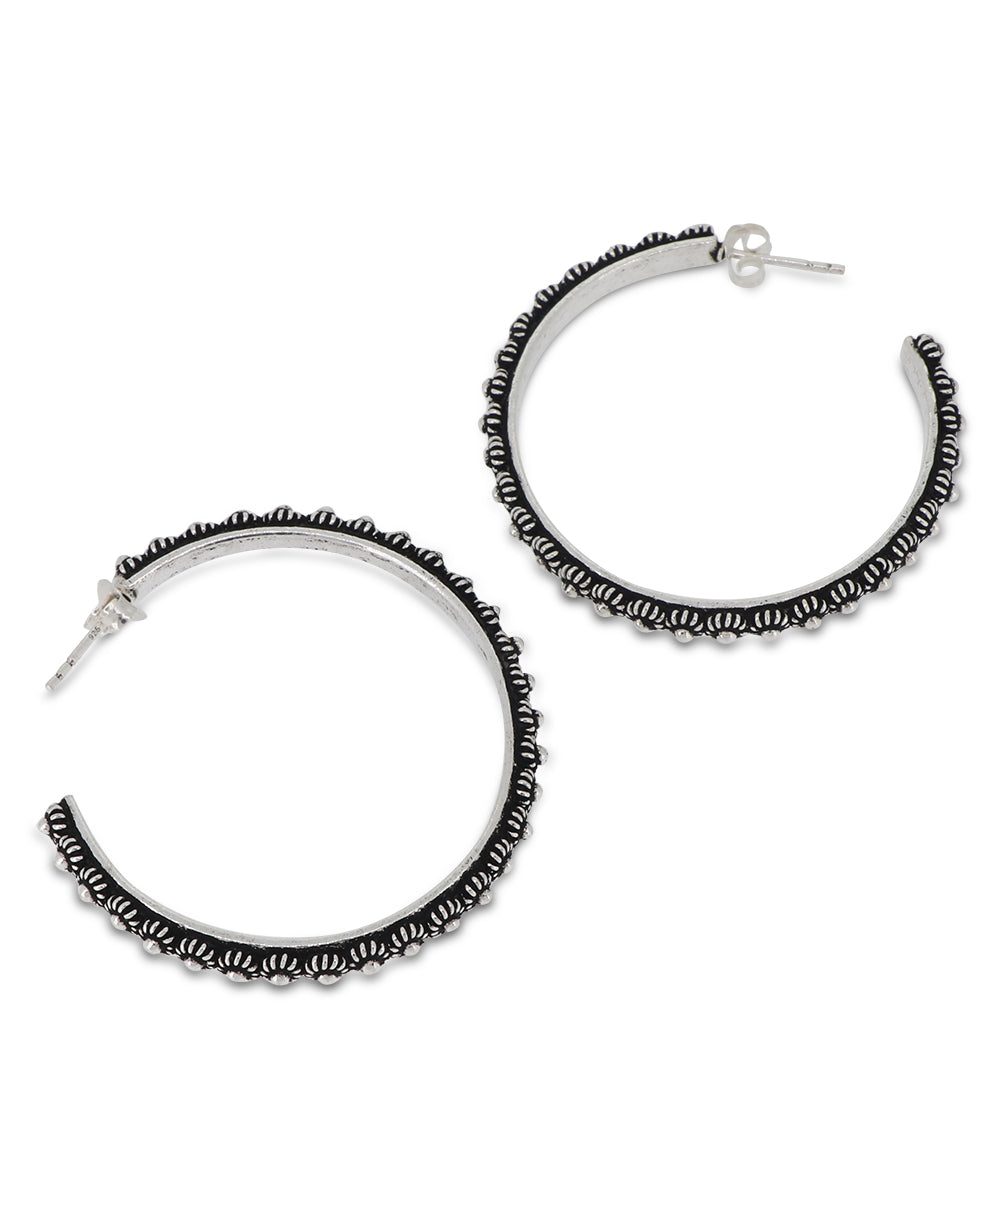 Laotian hill tribe silver hoop earrings with butterfly hook backing, measuring 1.75 inches tall"